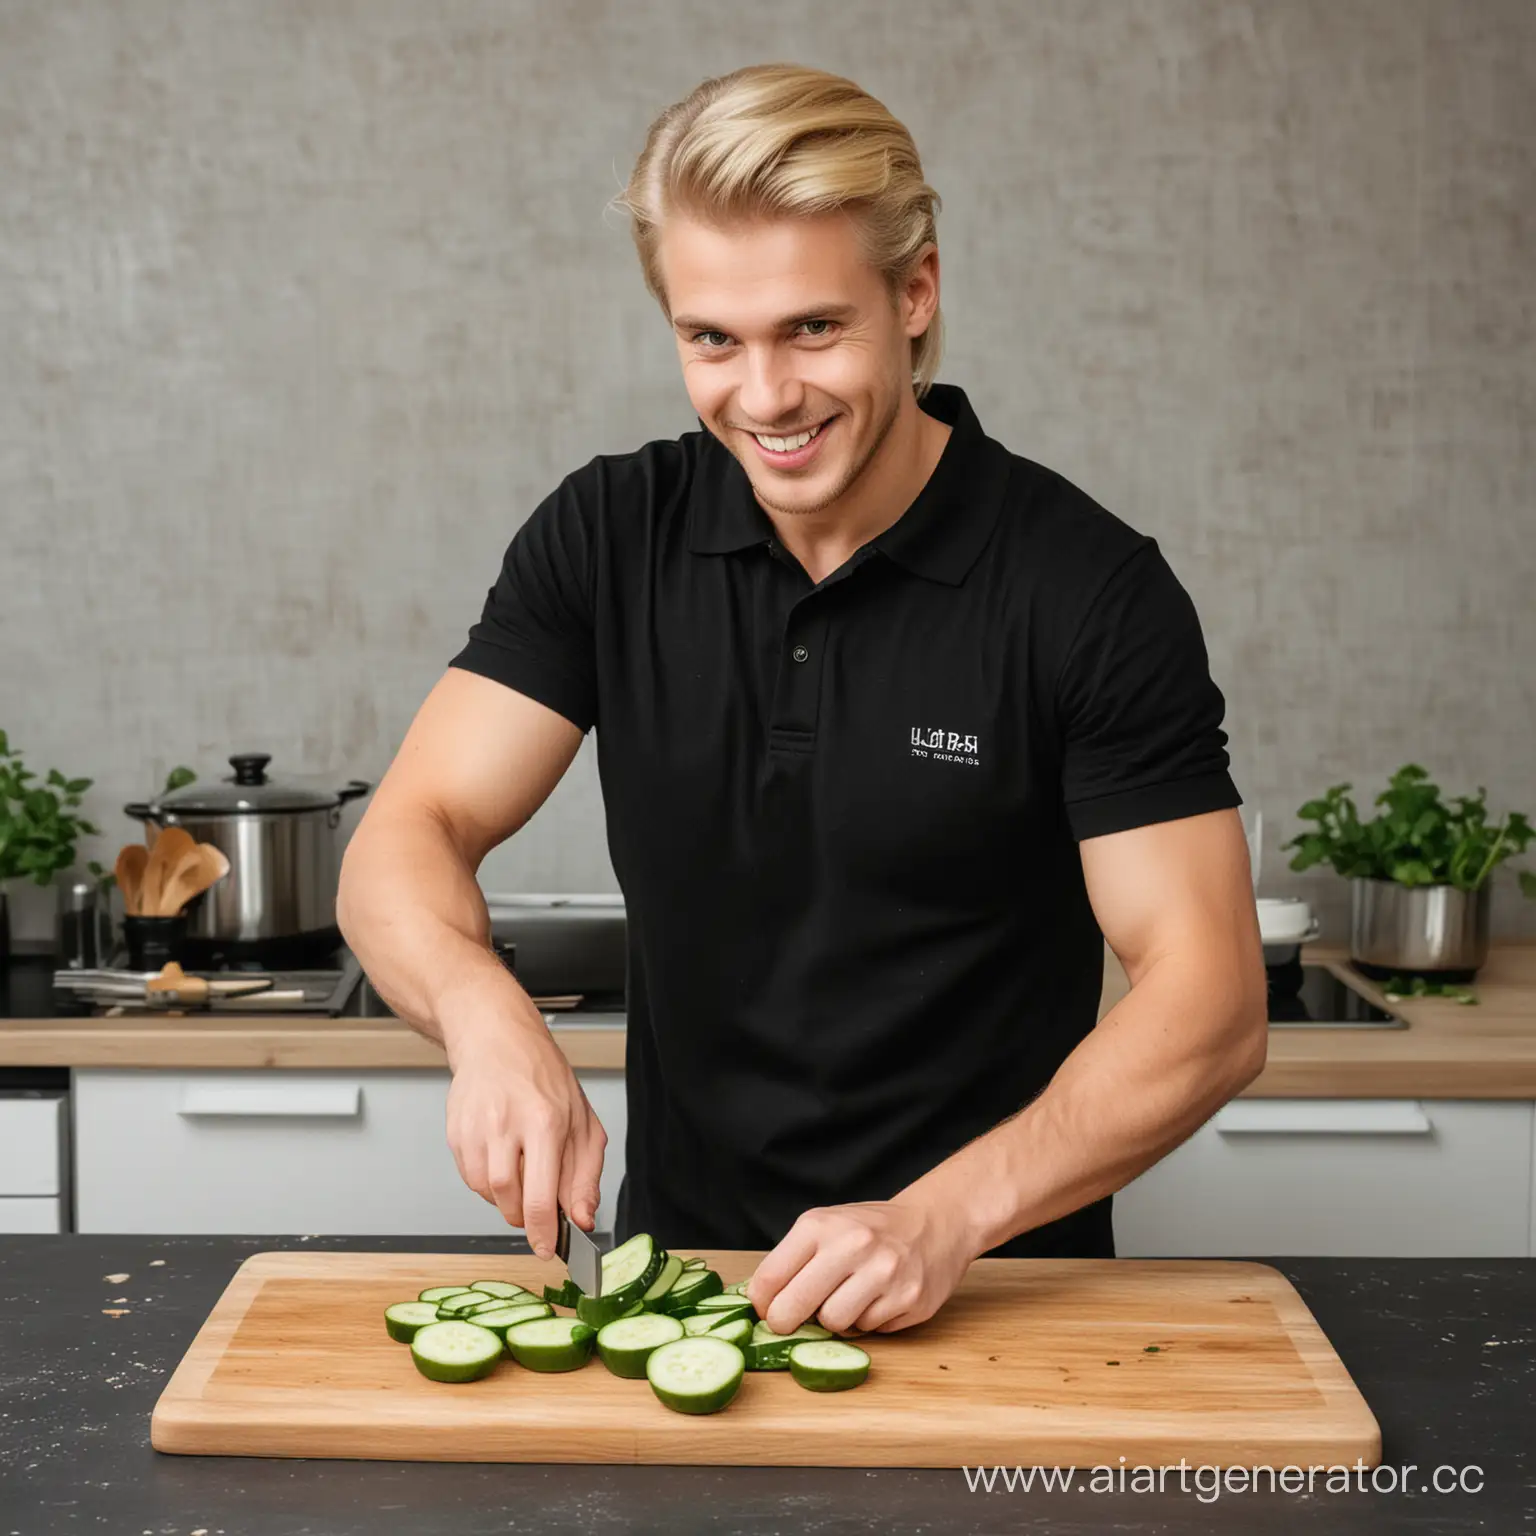 Smiling-Russian-Cook-Cutting-Cucumber-on-a-Board